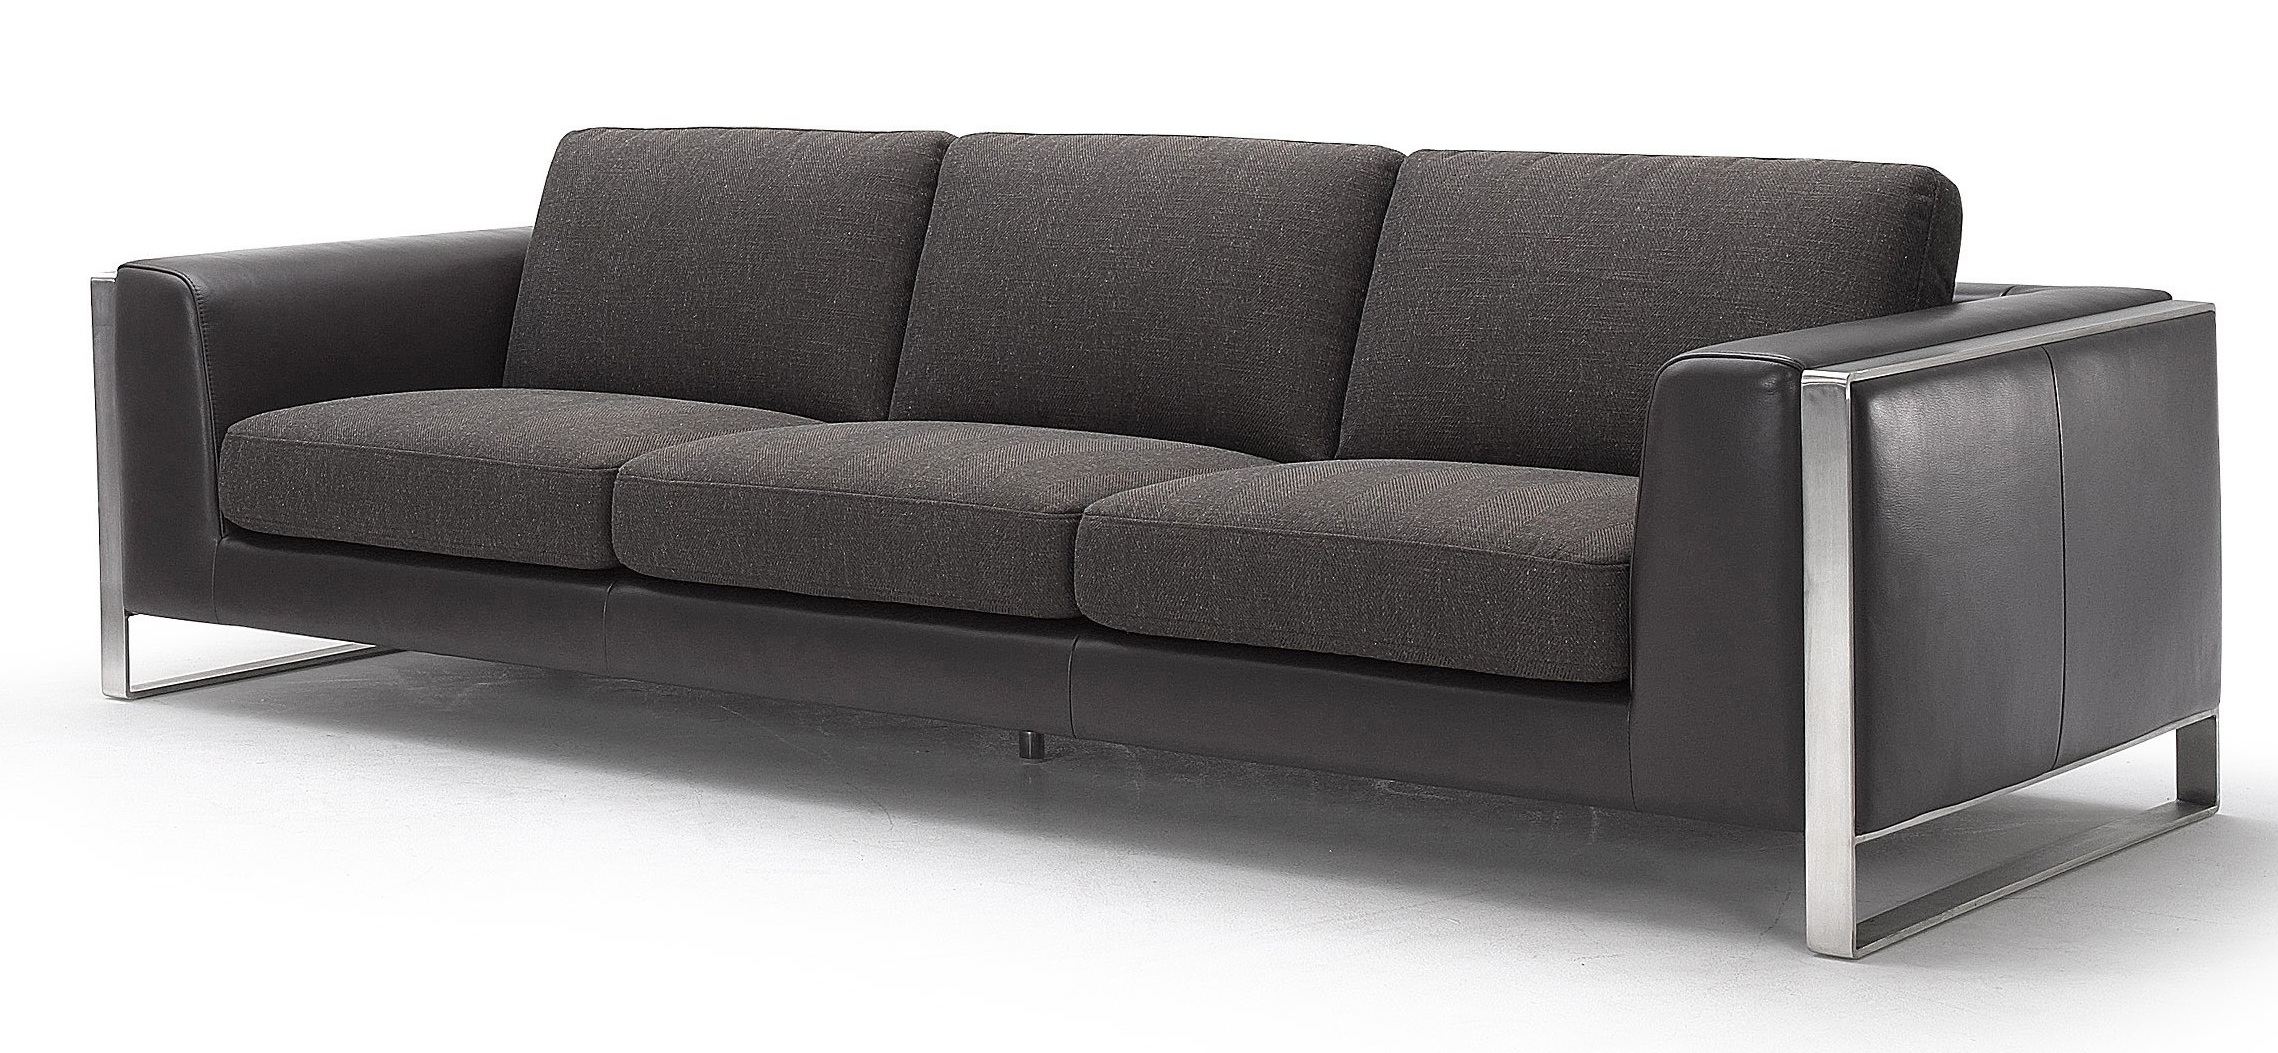 contemporary sofa delightful modern style couches 16 sofa with contemporary concept QYAYXYL